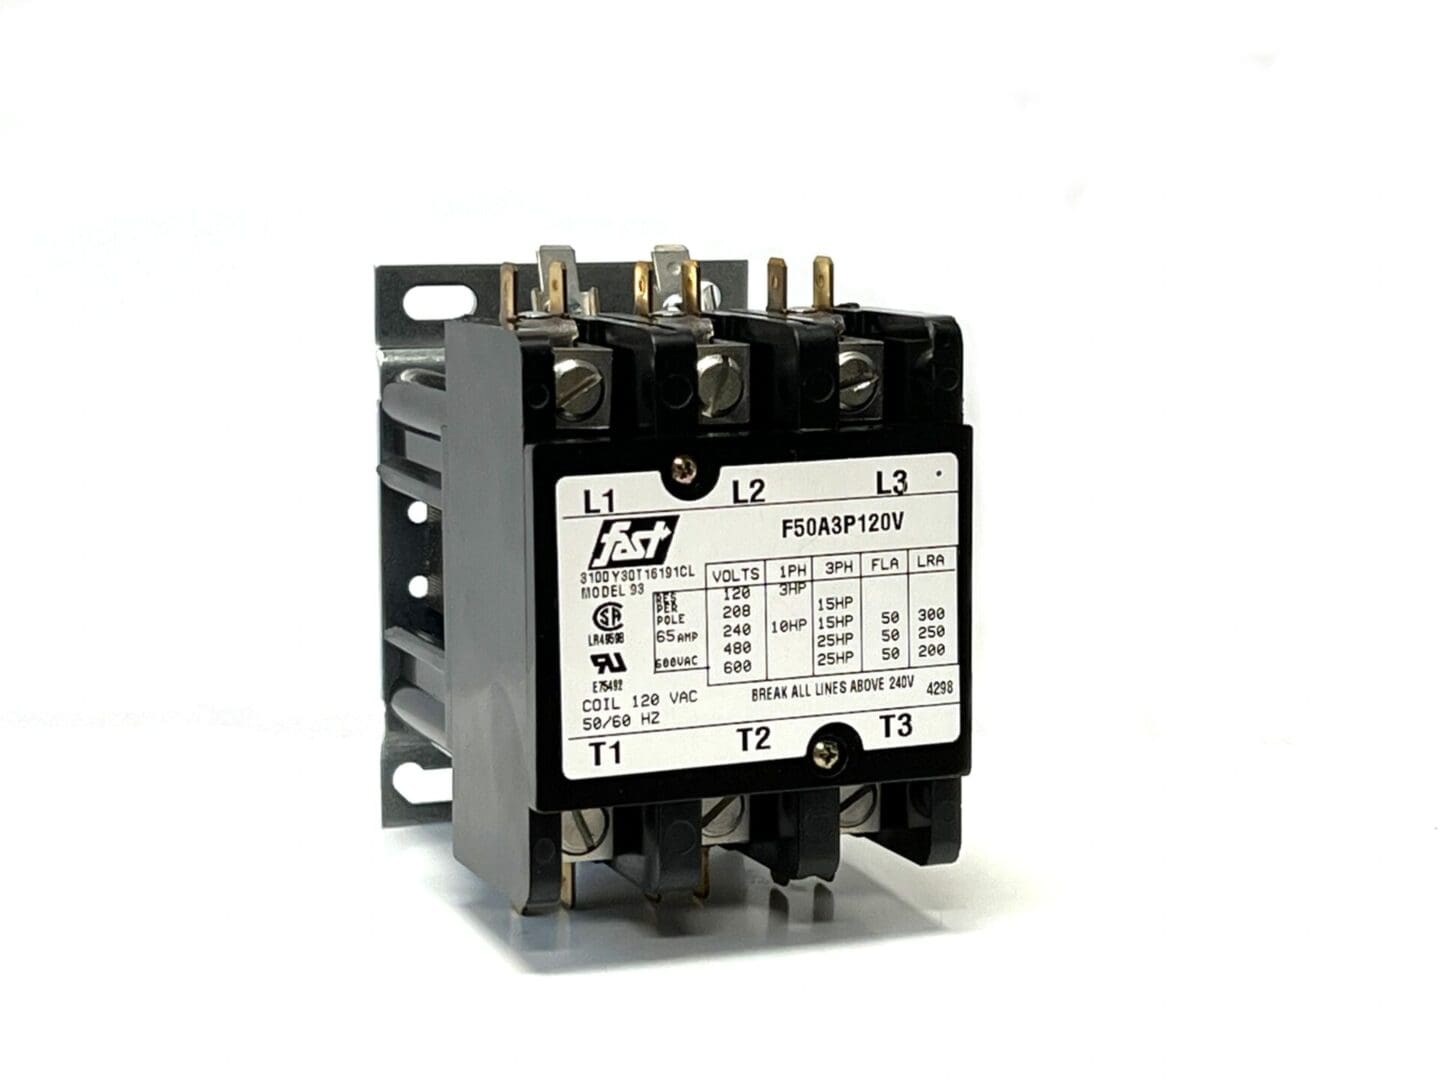 A close up of a three phase contactor